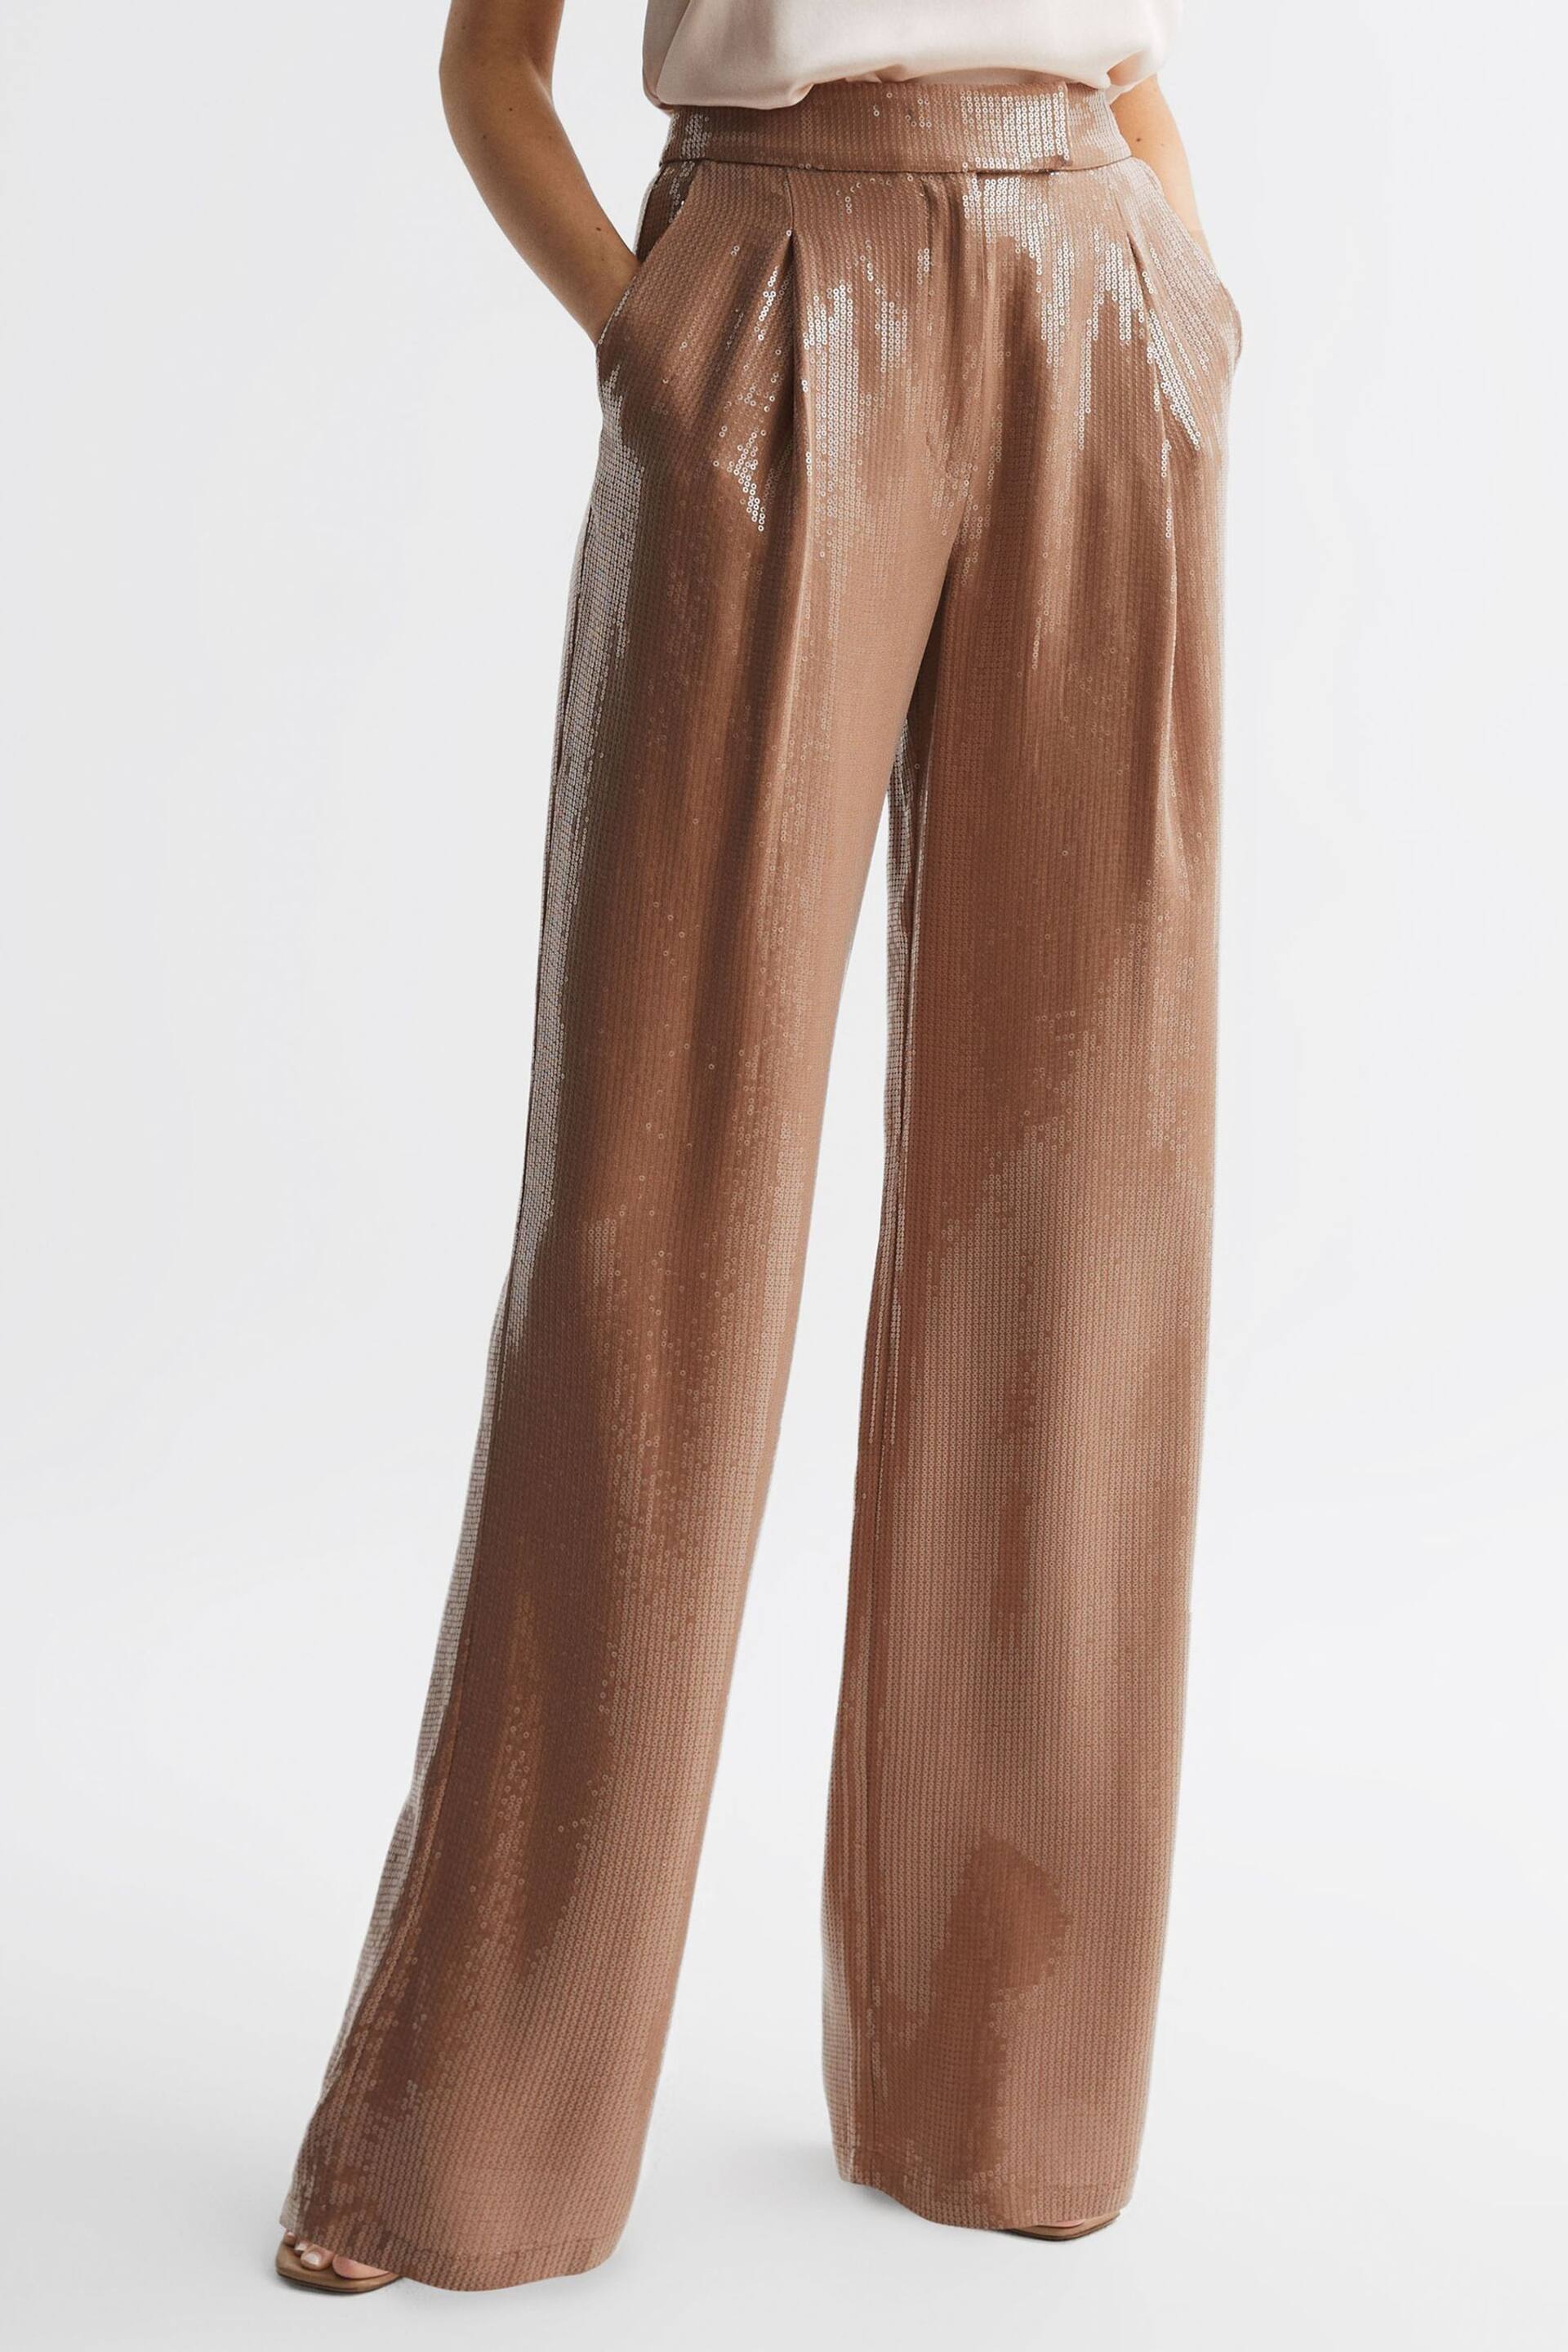 Reiss Nude Lizzie Sequin Wide Leg Trousers - Image 6 of 7